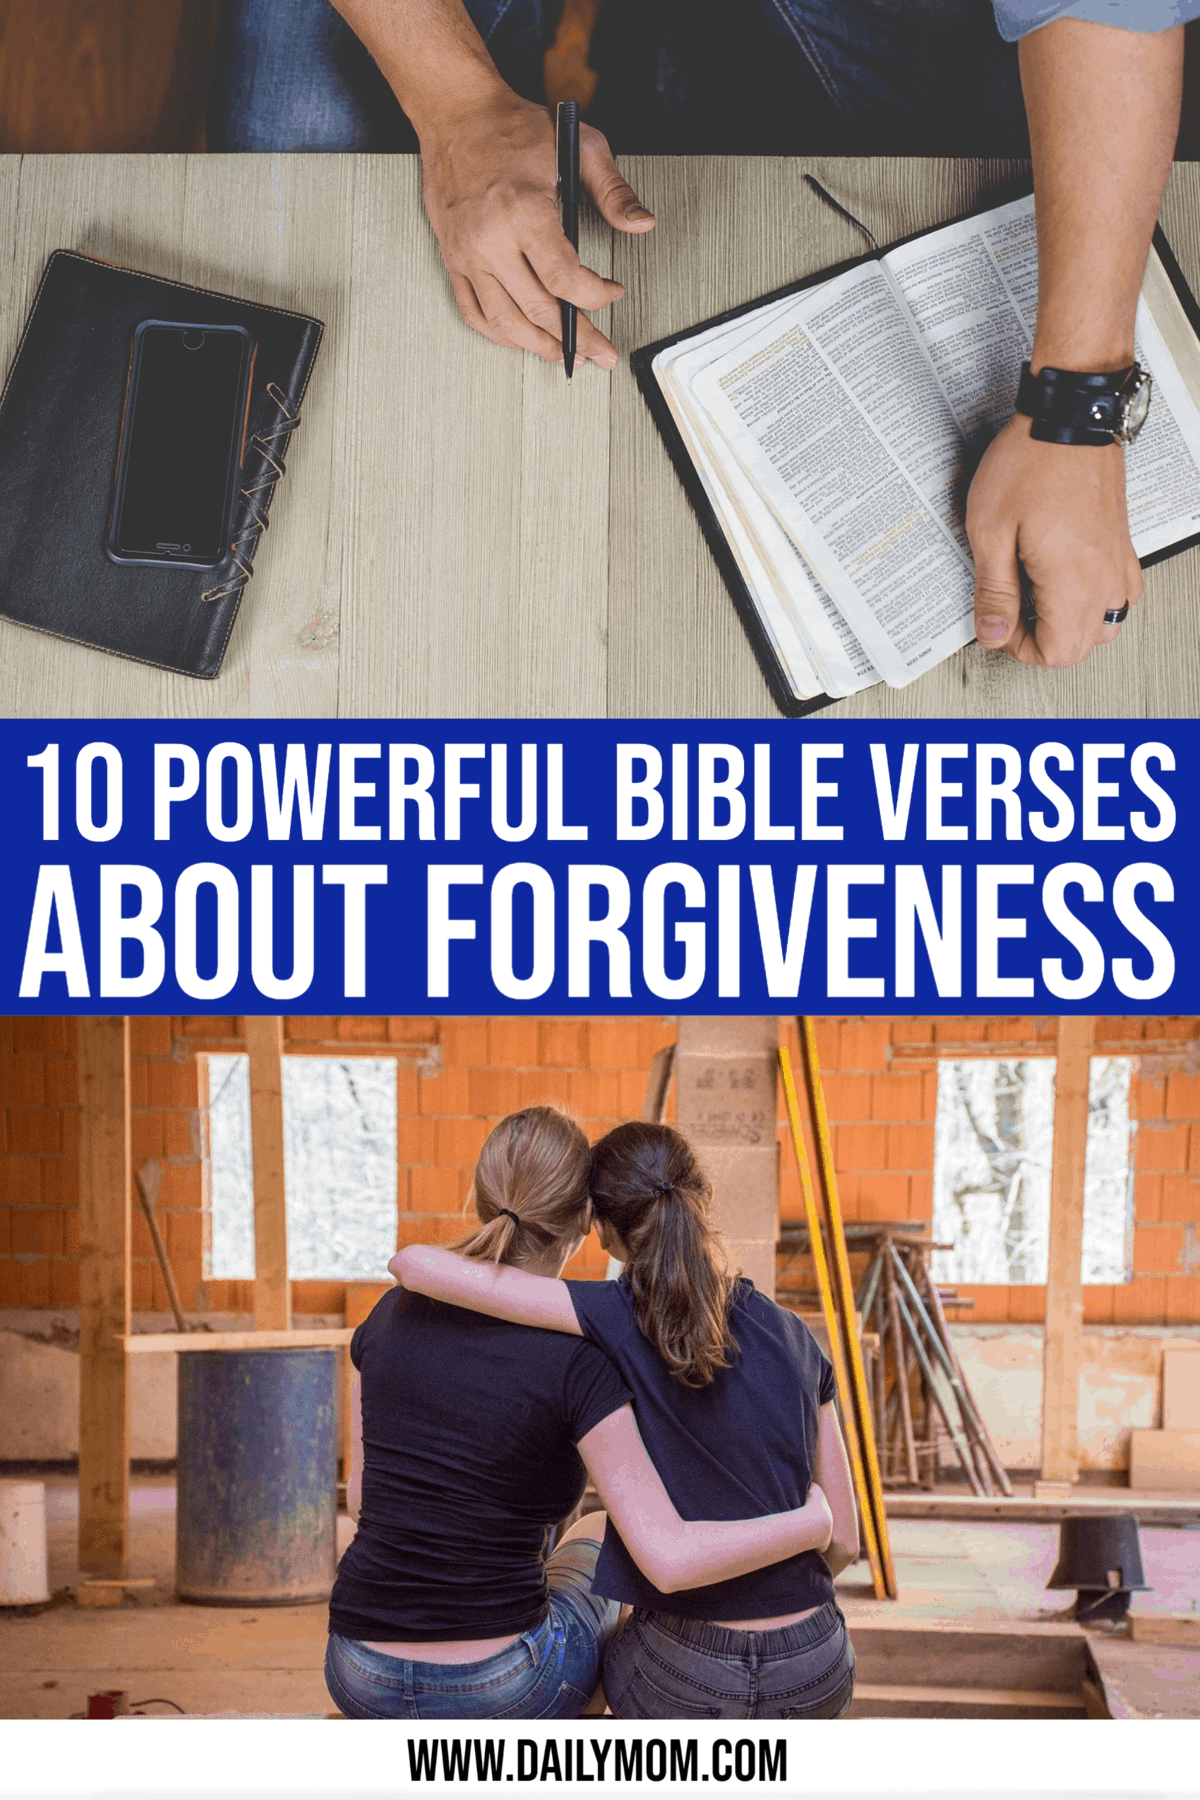 10 Powerful Forgive Verses In Bible Passages » Read Now!